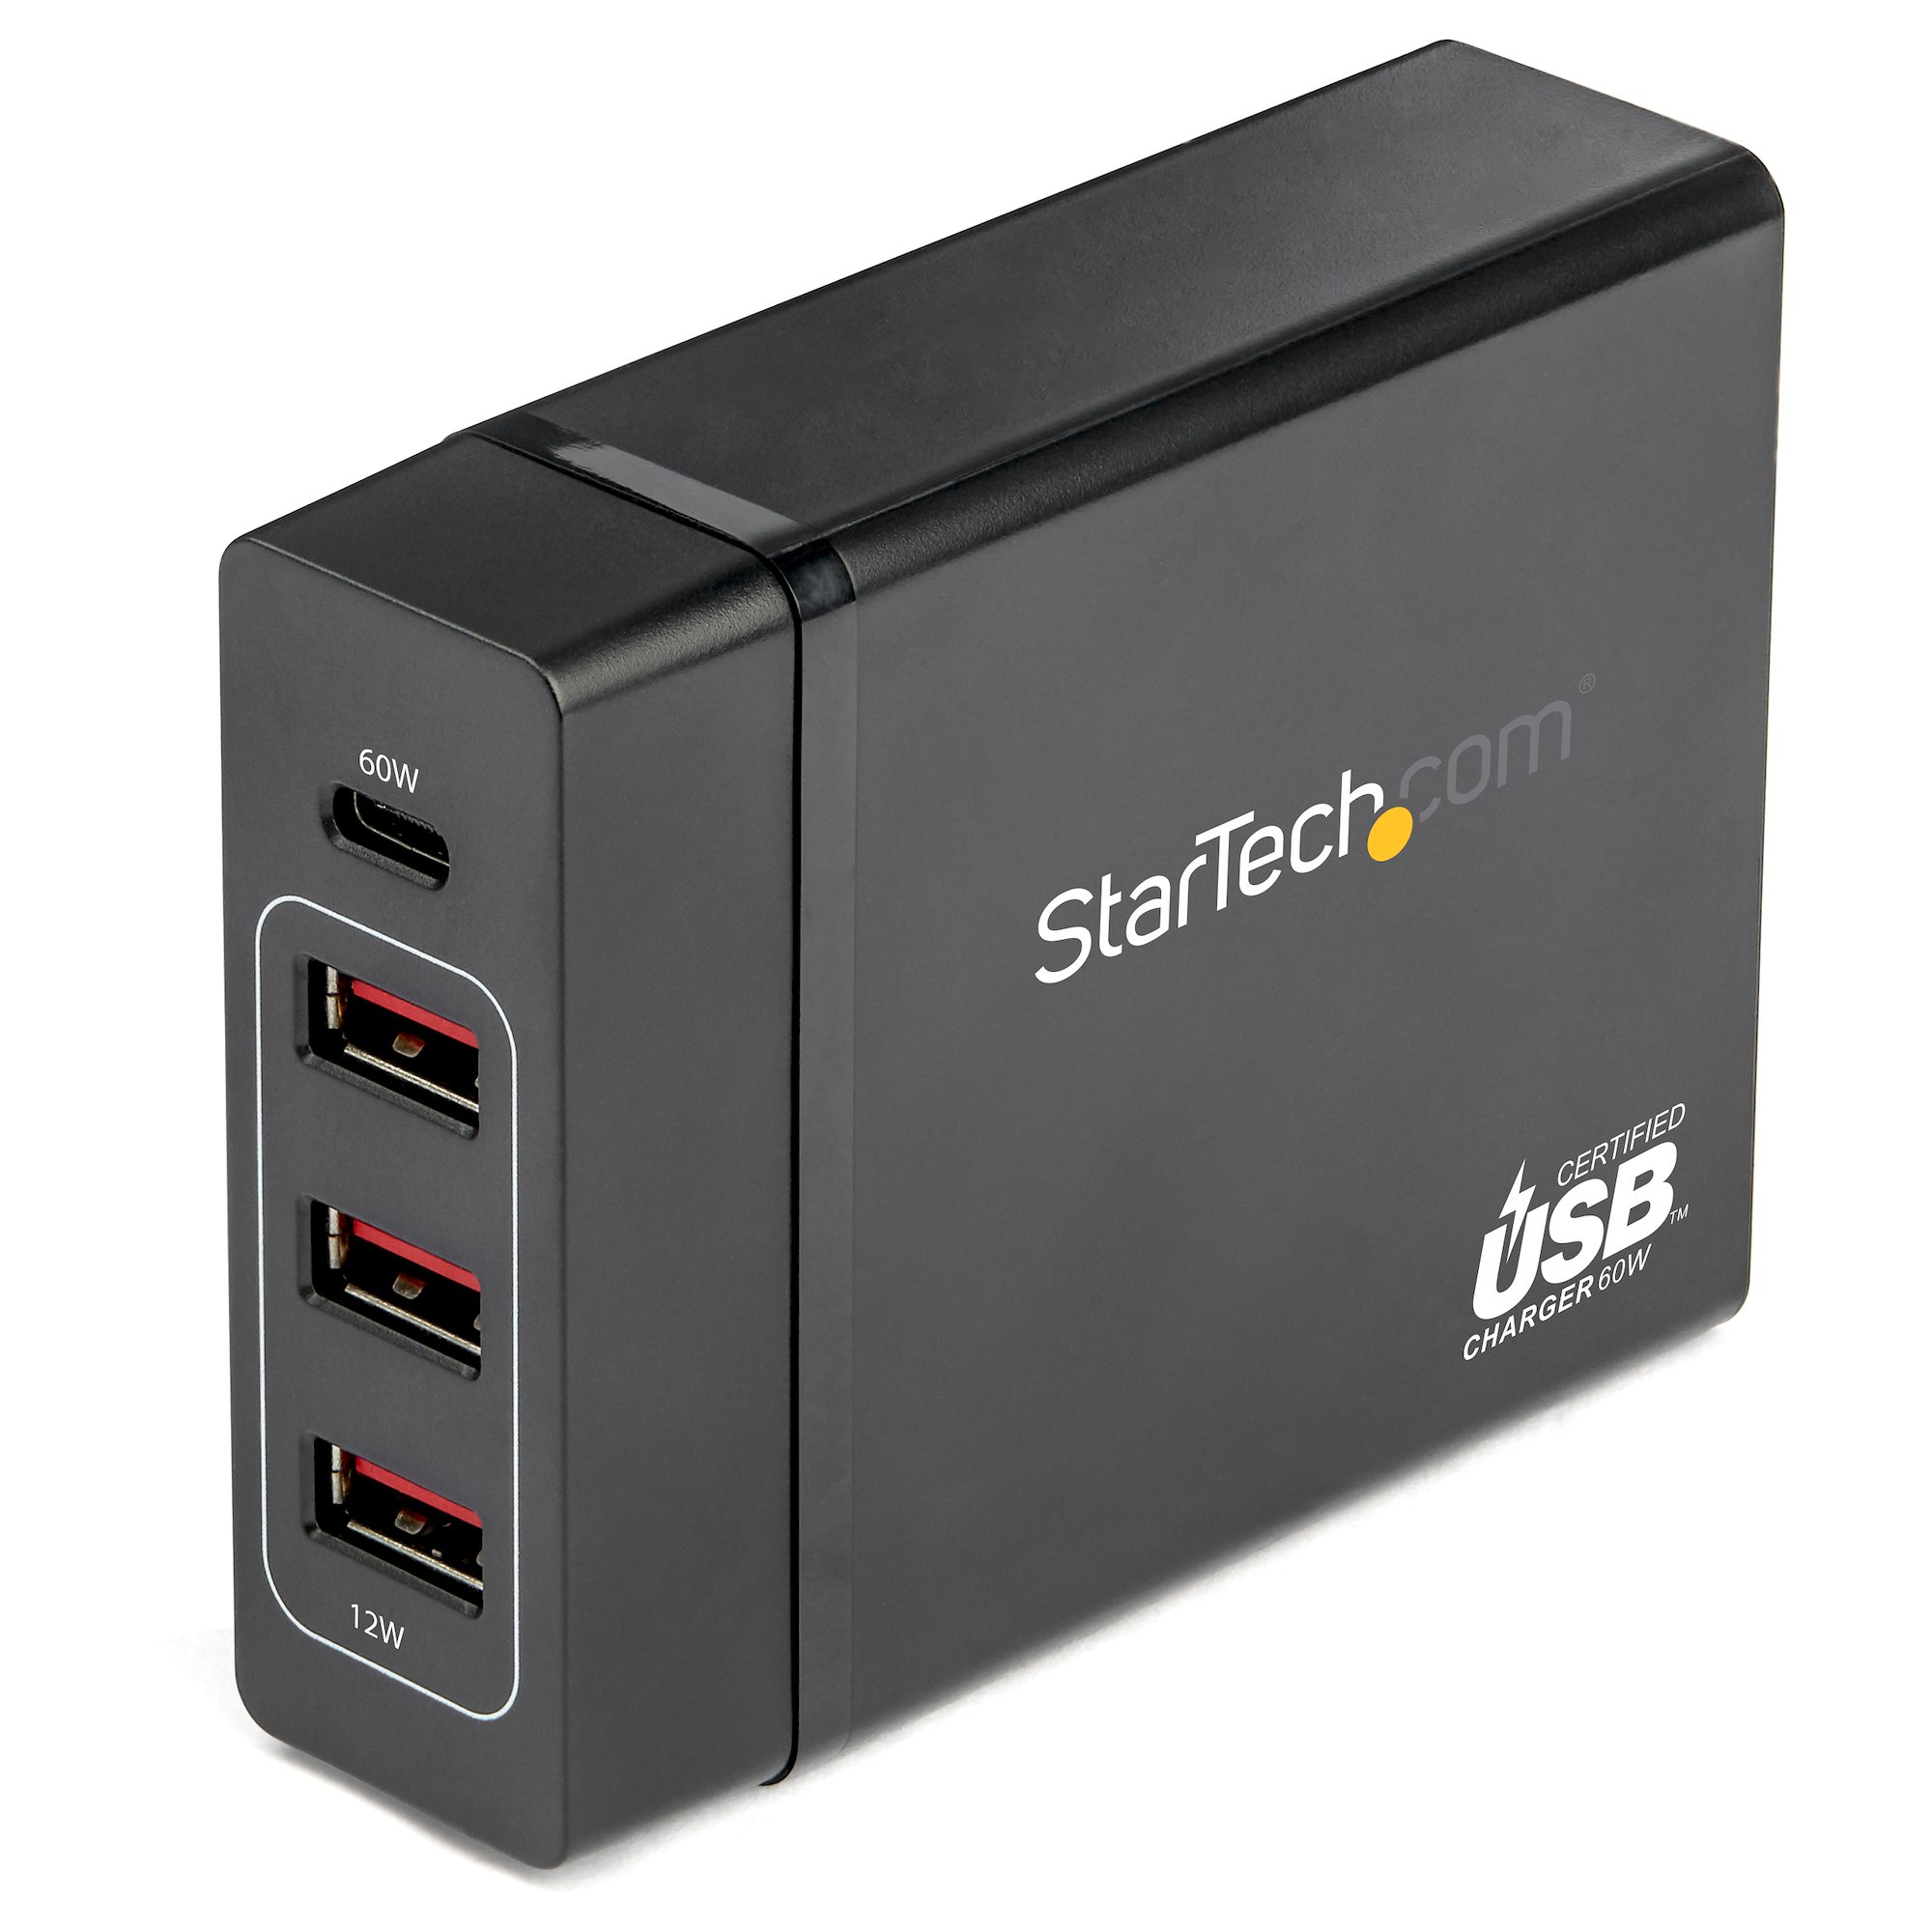 1-Port USB Wall/Travel Charger, Quick Charge 3.0, 5/9/12V DC